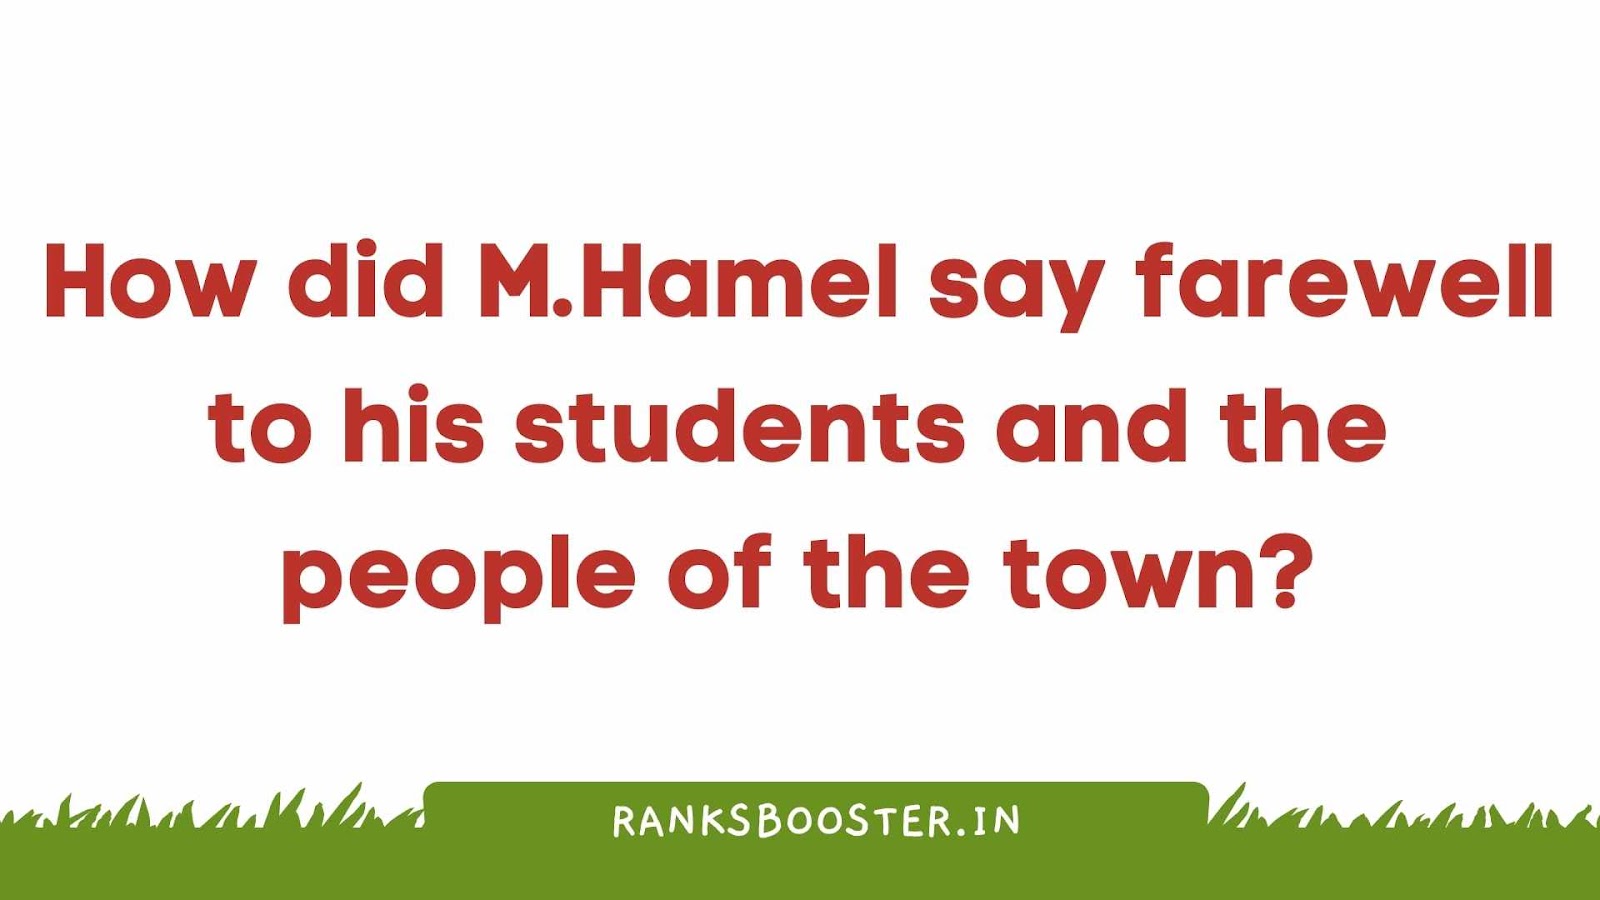 How did M.Hamel say farewell to his students and the people of the town?